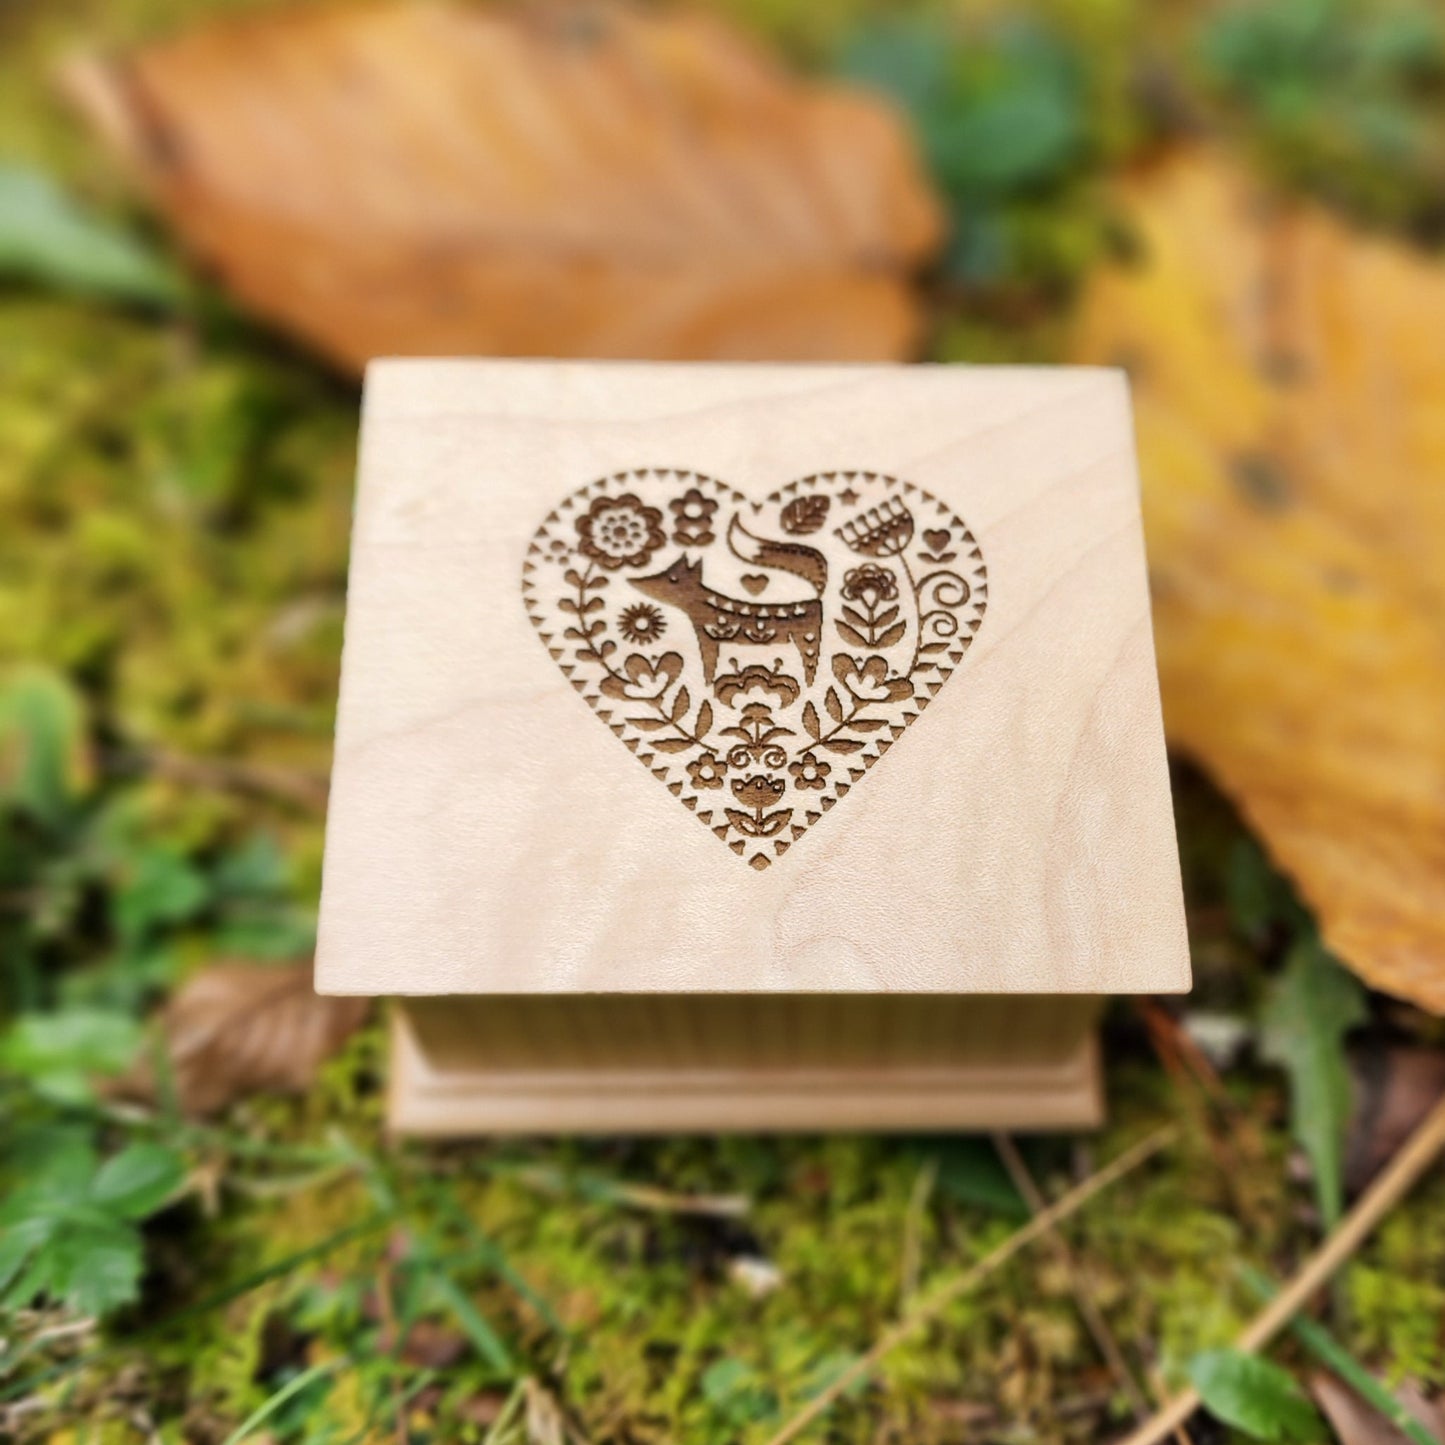 Folkart Inspired Music box with heart engraved on top, choose color and song, personalize